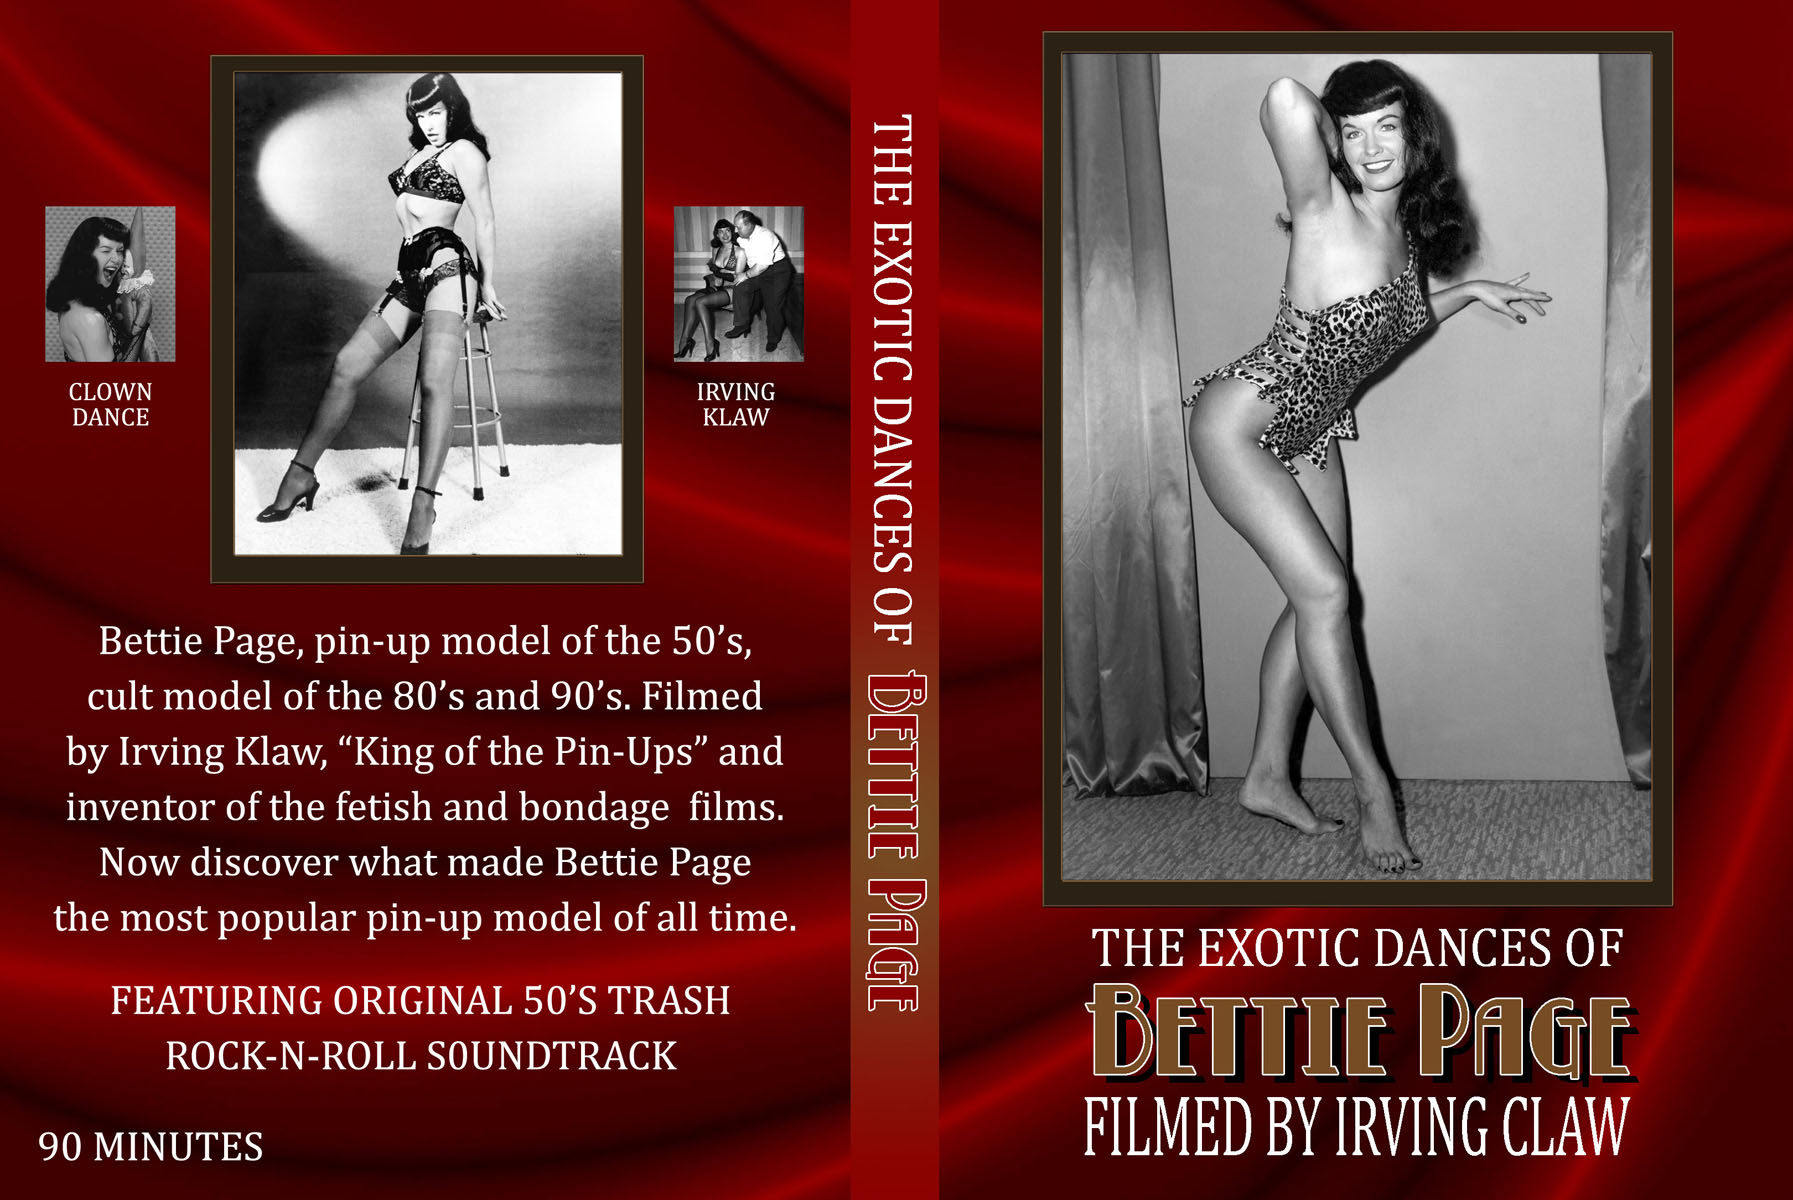 Exotic Dances of Bettie Page